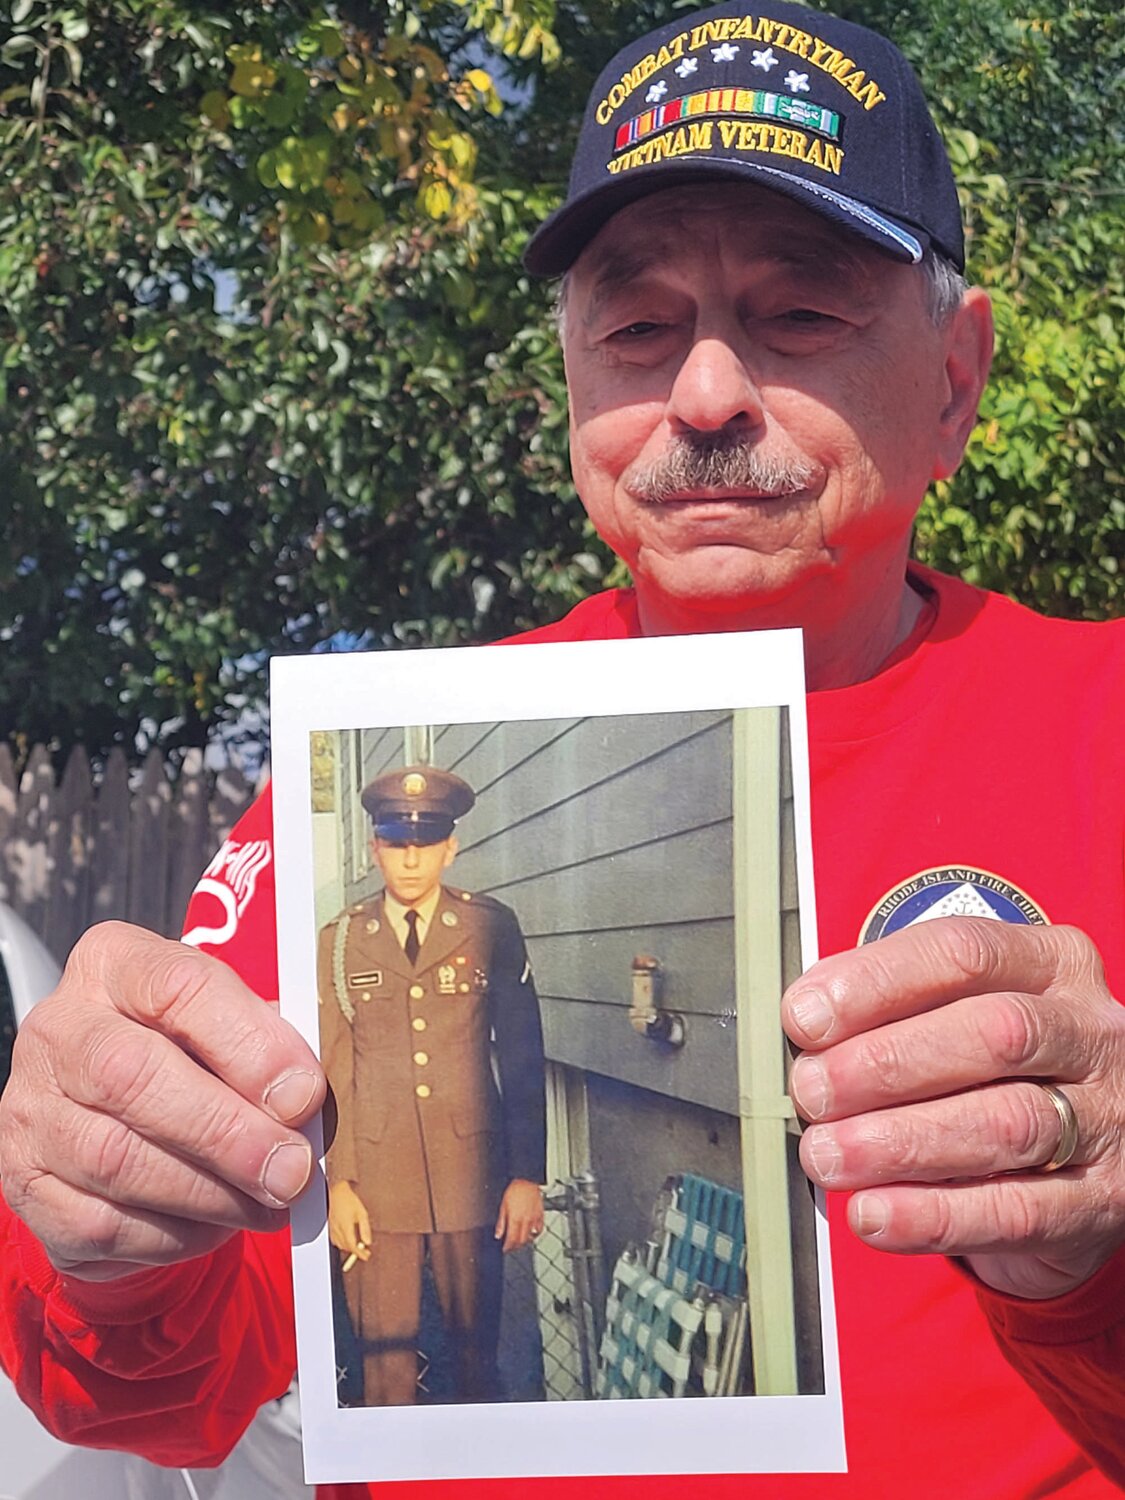 HIS LIST: Retired U.S. Army Sgt. John Tammelleo has a list of lost buddies he wants to look up on the Vietnam Memorial Wall. He plans to find each of the names and make rubbings. Here he holds a photo from his time serving in the infantry during the Vietnam War.